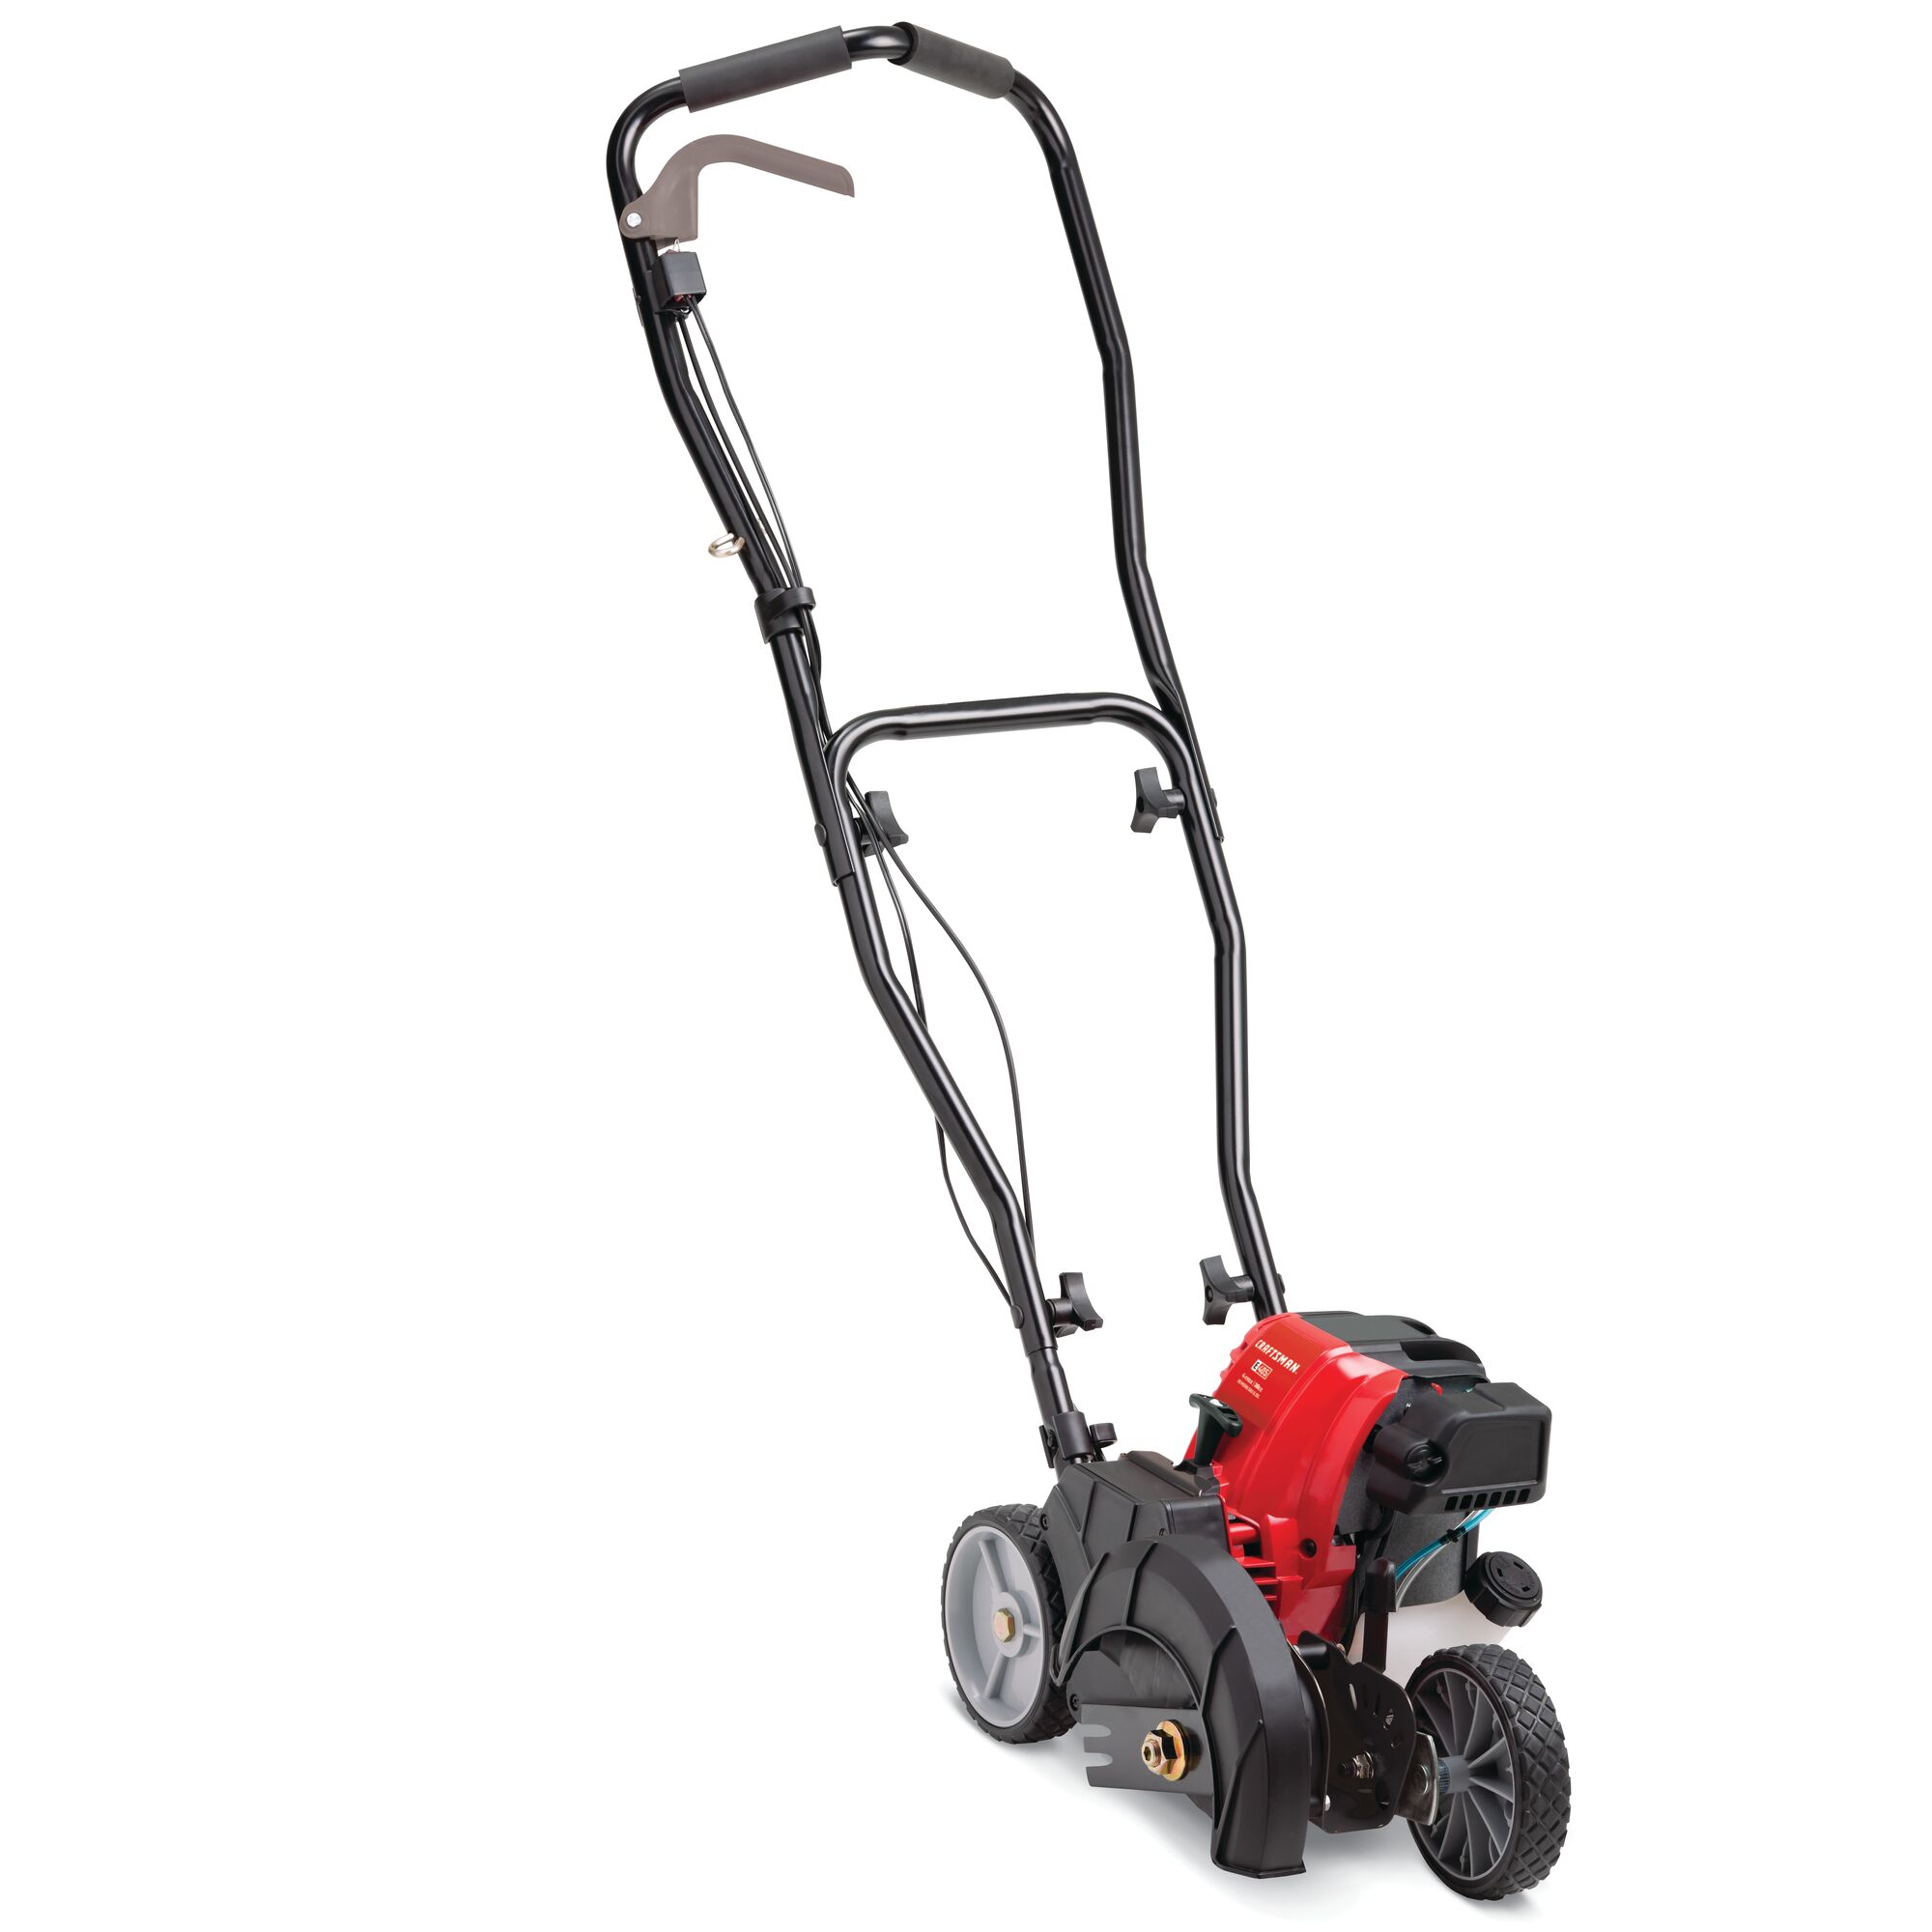 CRAFTSMAN 4 Cycle Gas Edger on white background